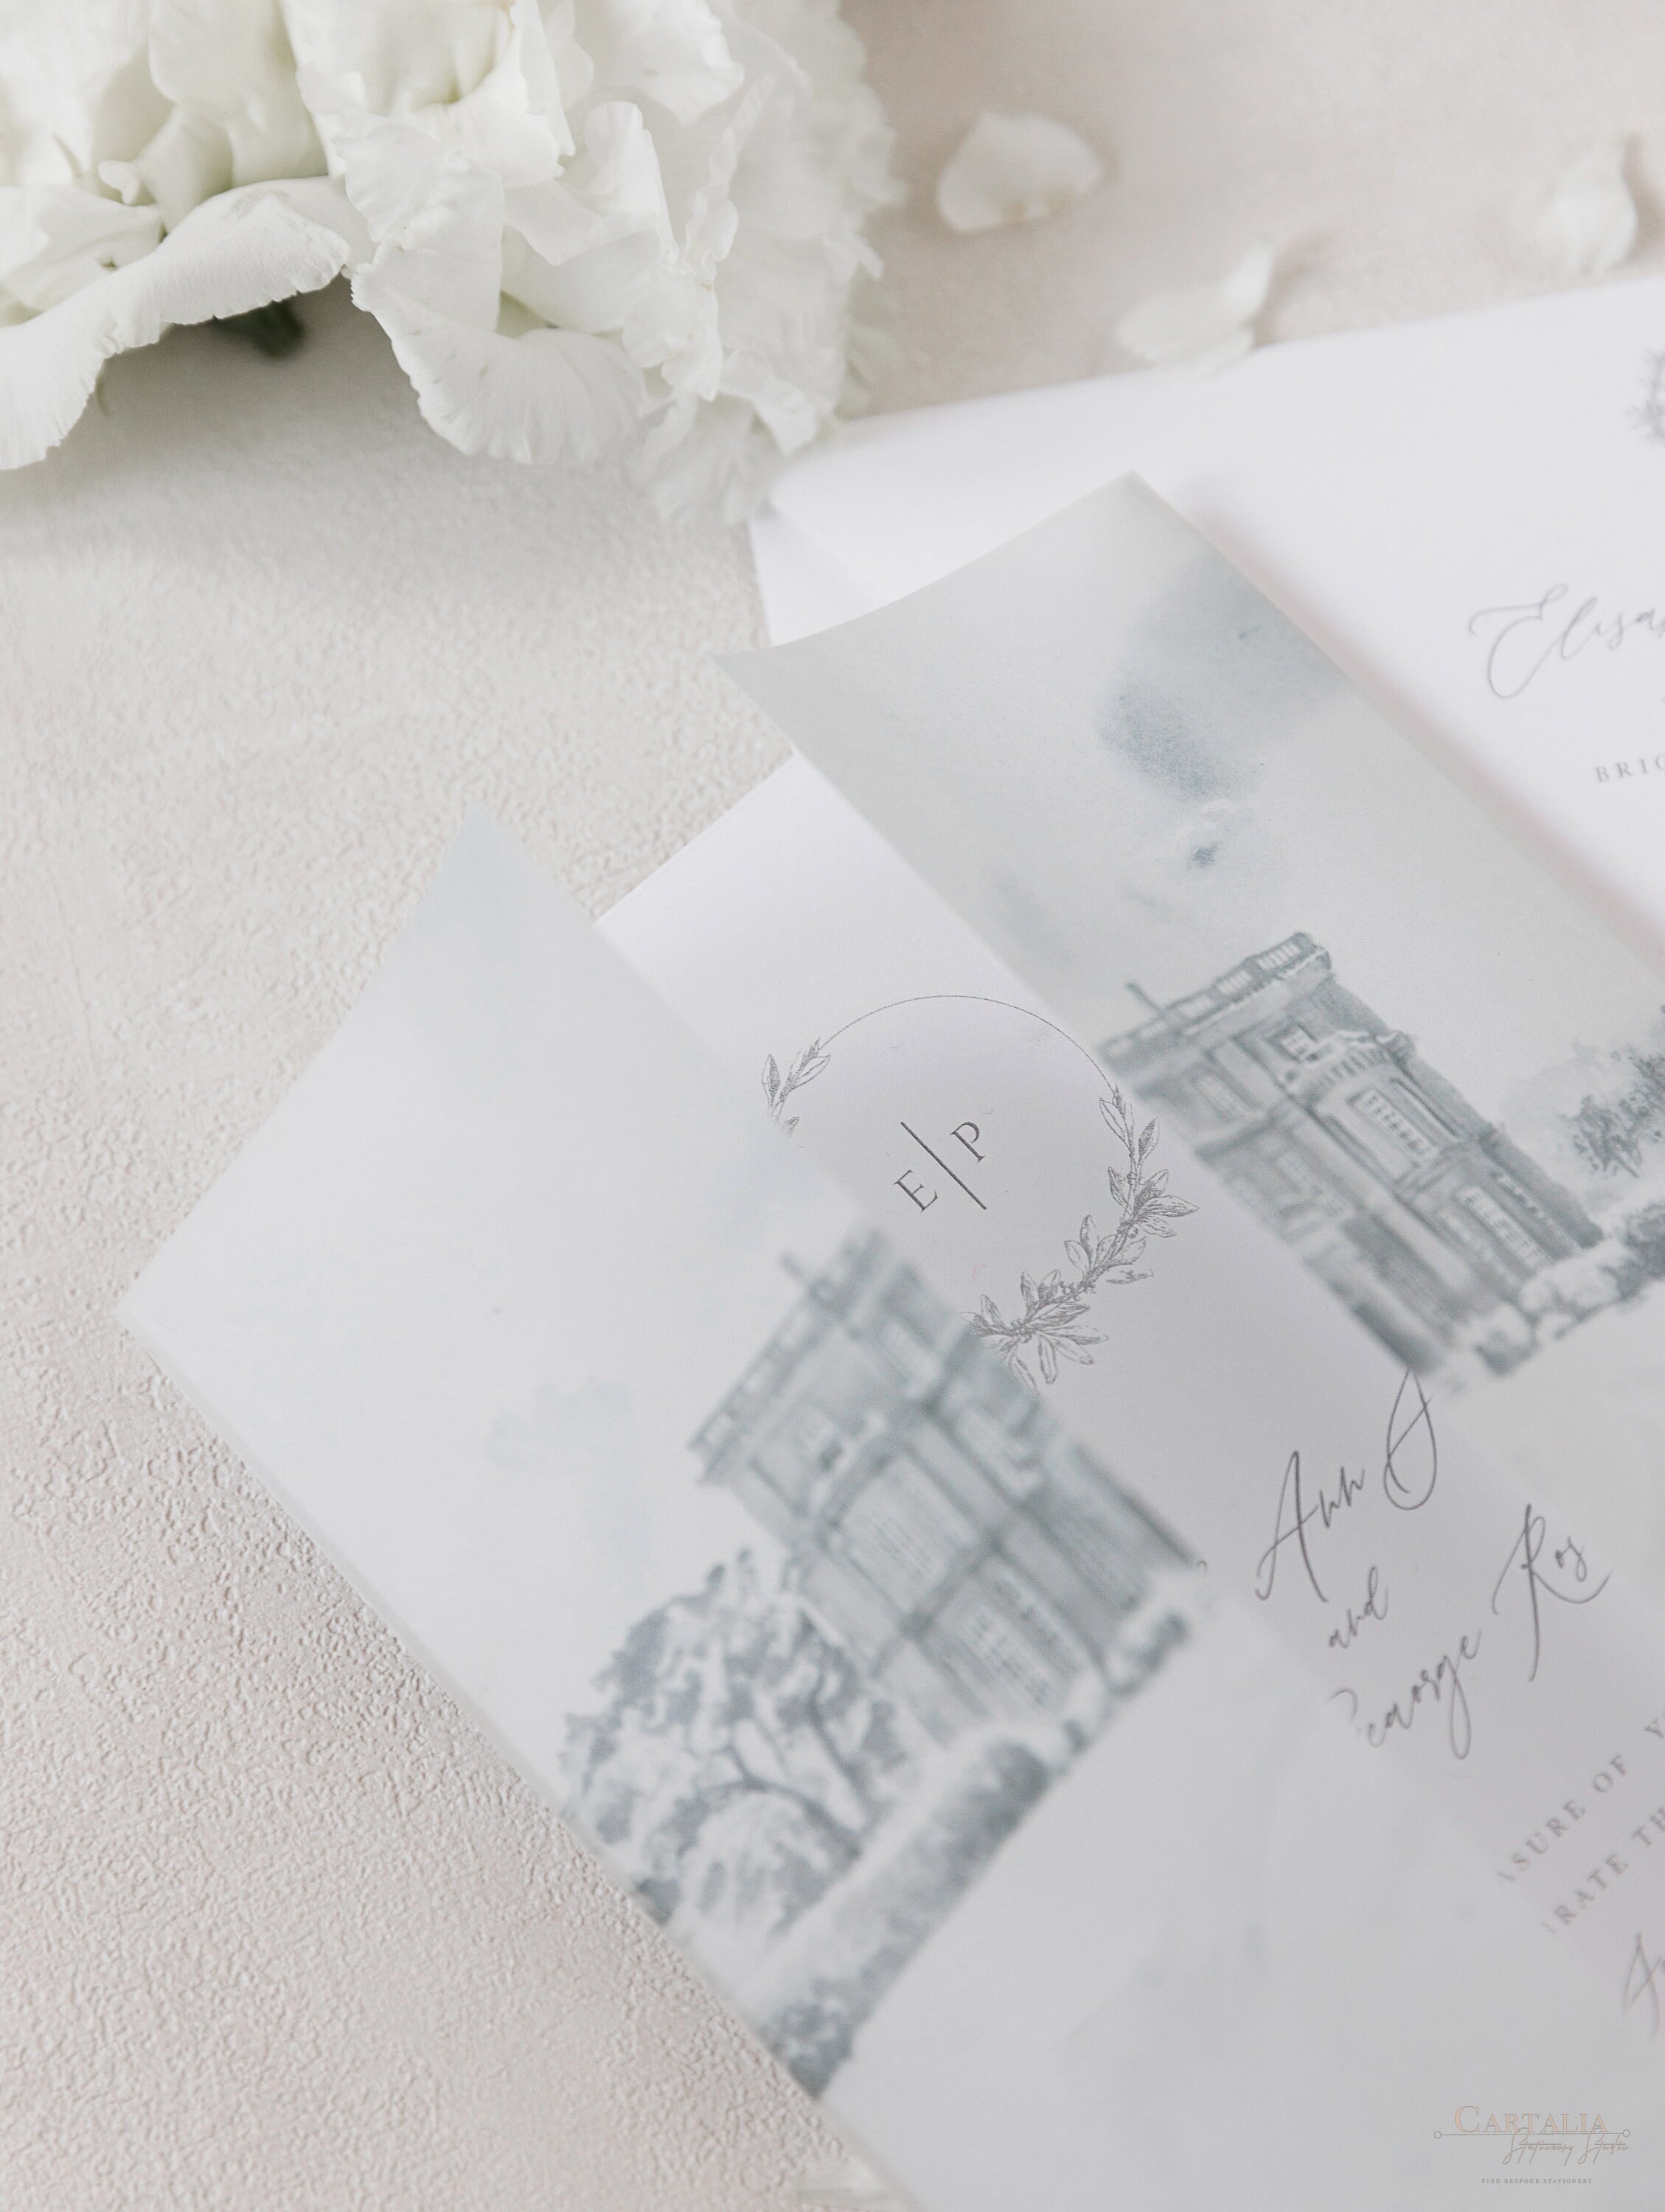 HEDSOR HOUSE  Your Venue invitation on Vellum with Wax Seal